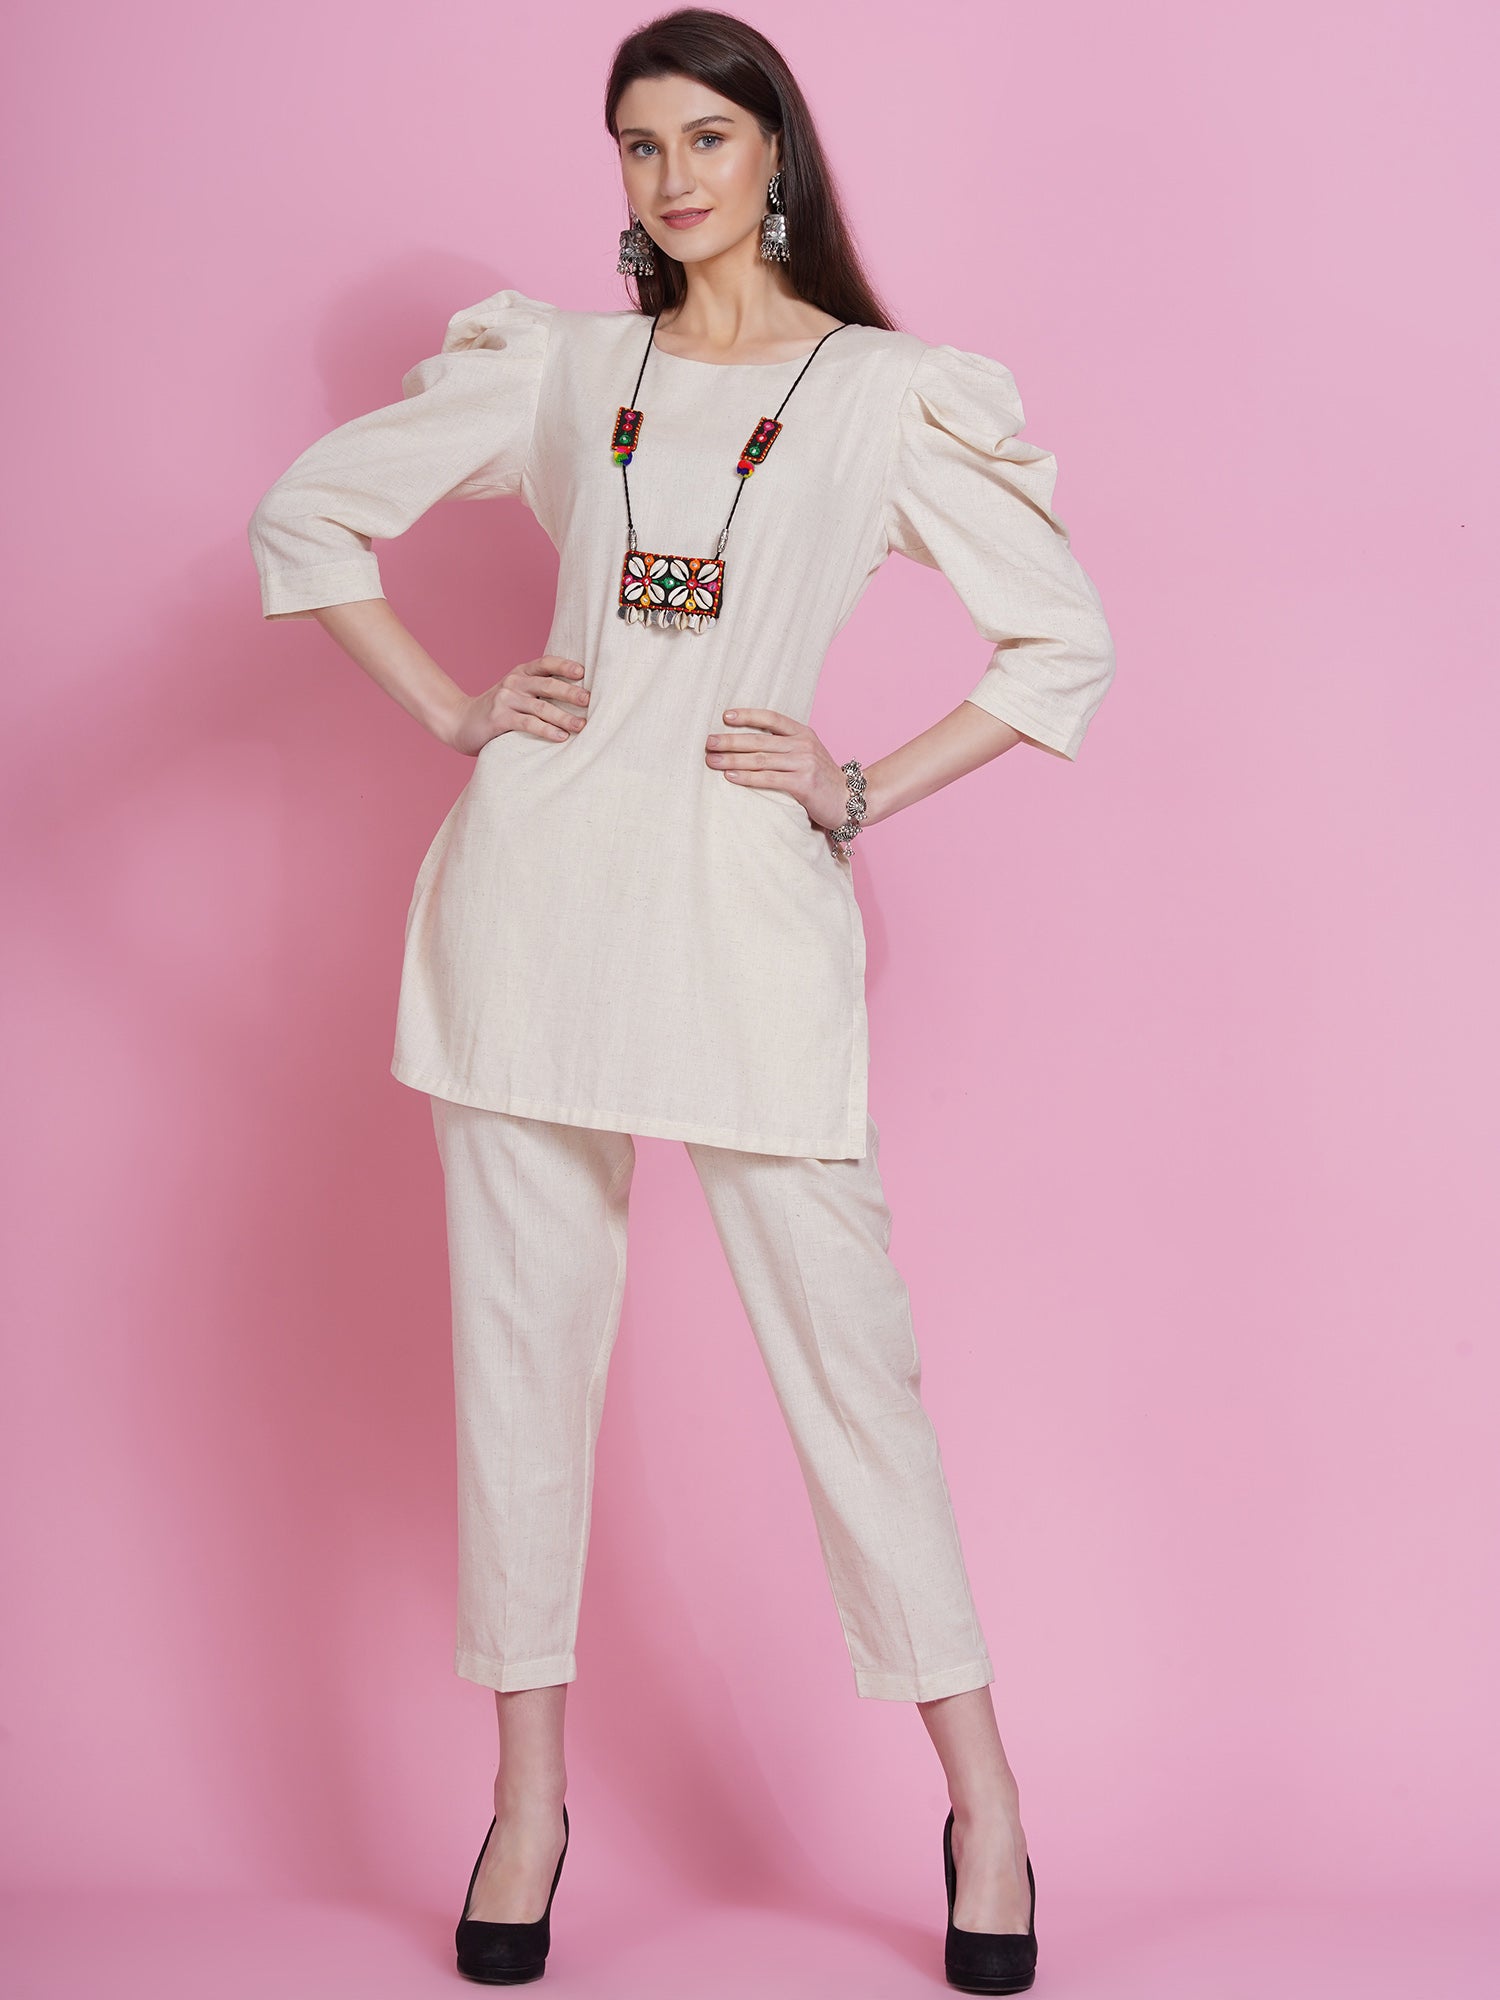 Off White Cotton Flex Kurta with Attached Necklace and Pants-WRKS079